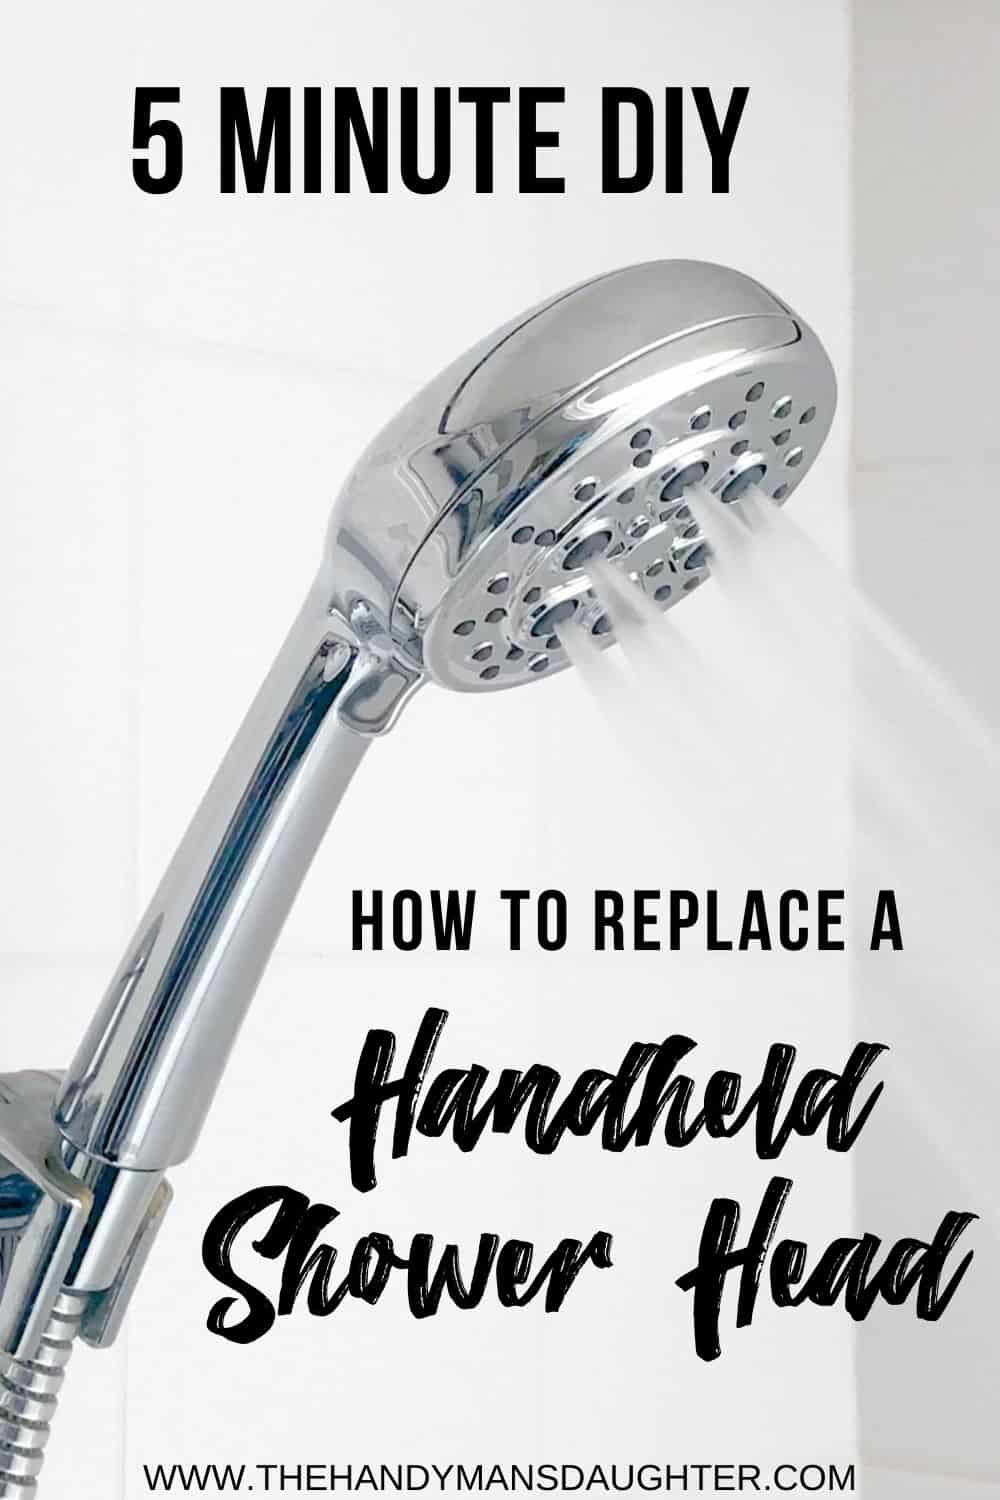 how to install a handheld shower head